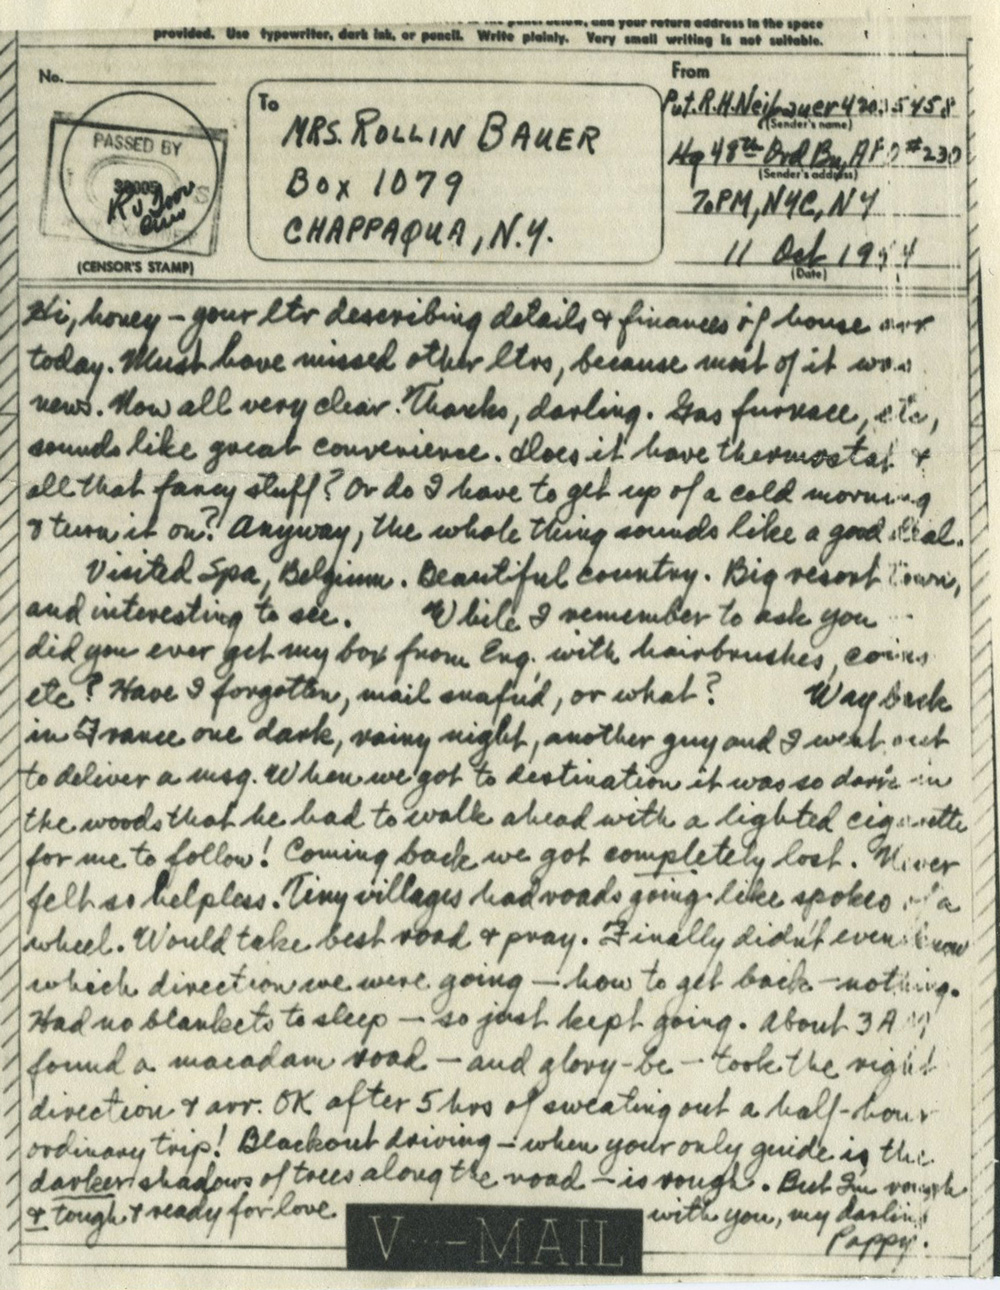 10-11-44-ww2-letters-mary-anne-erickson